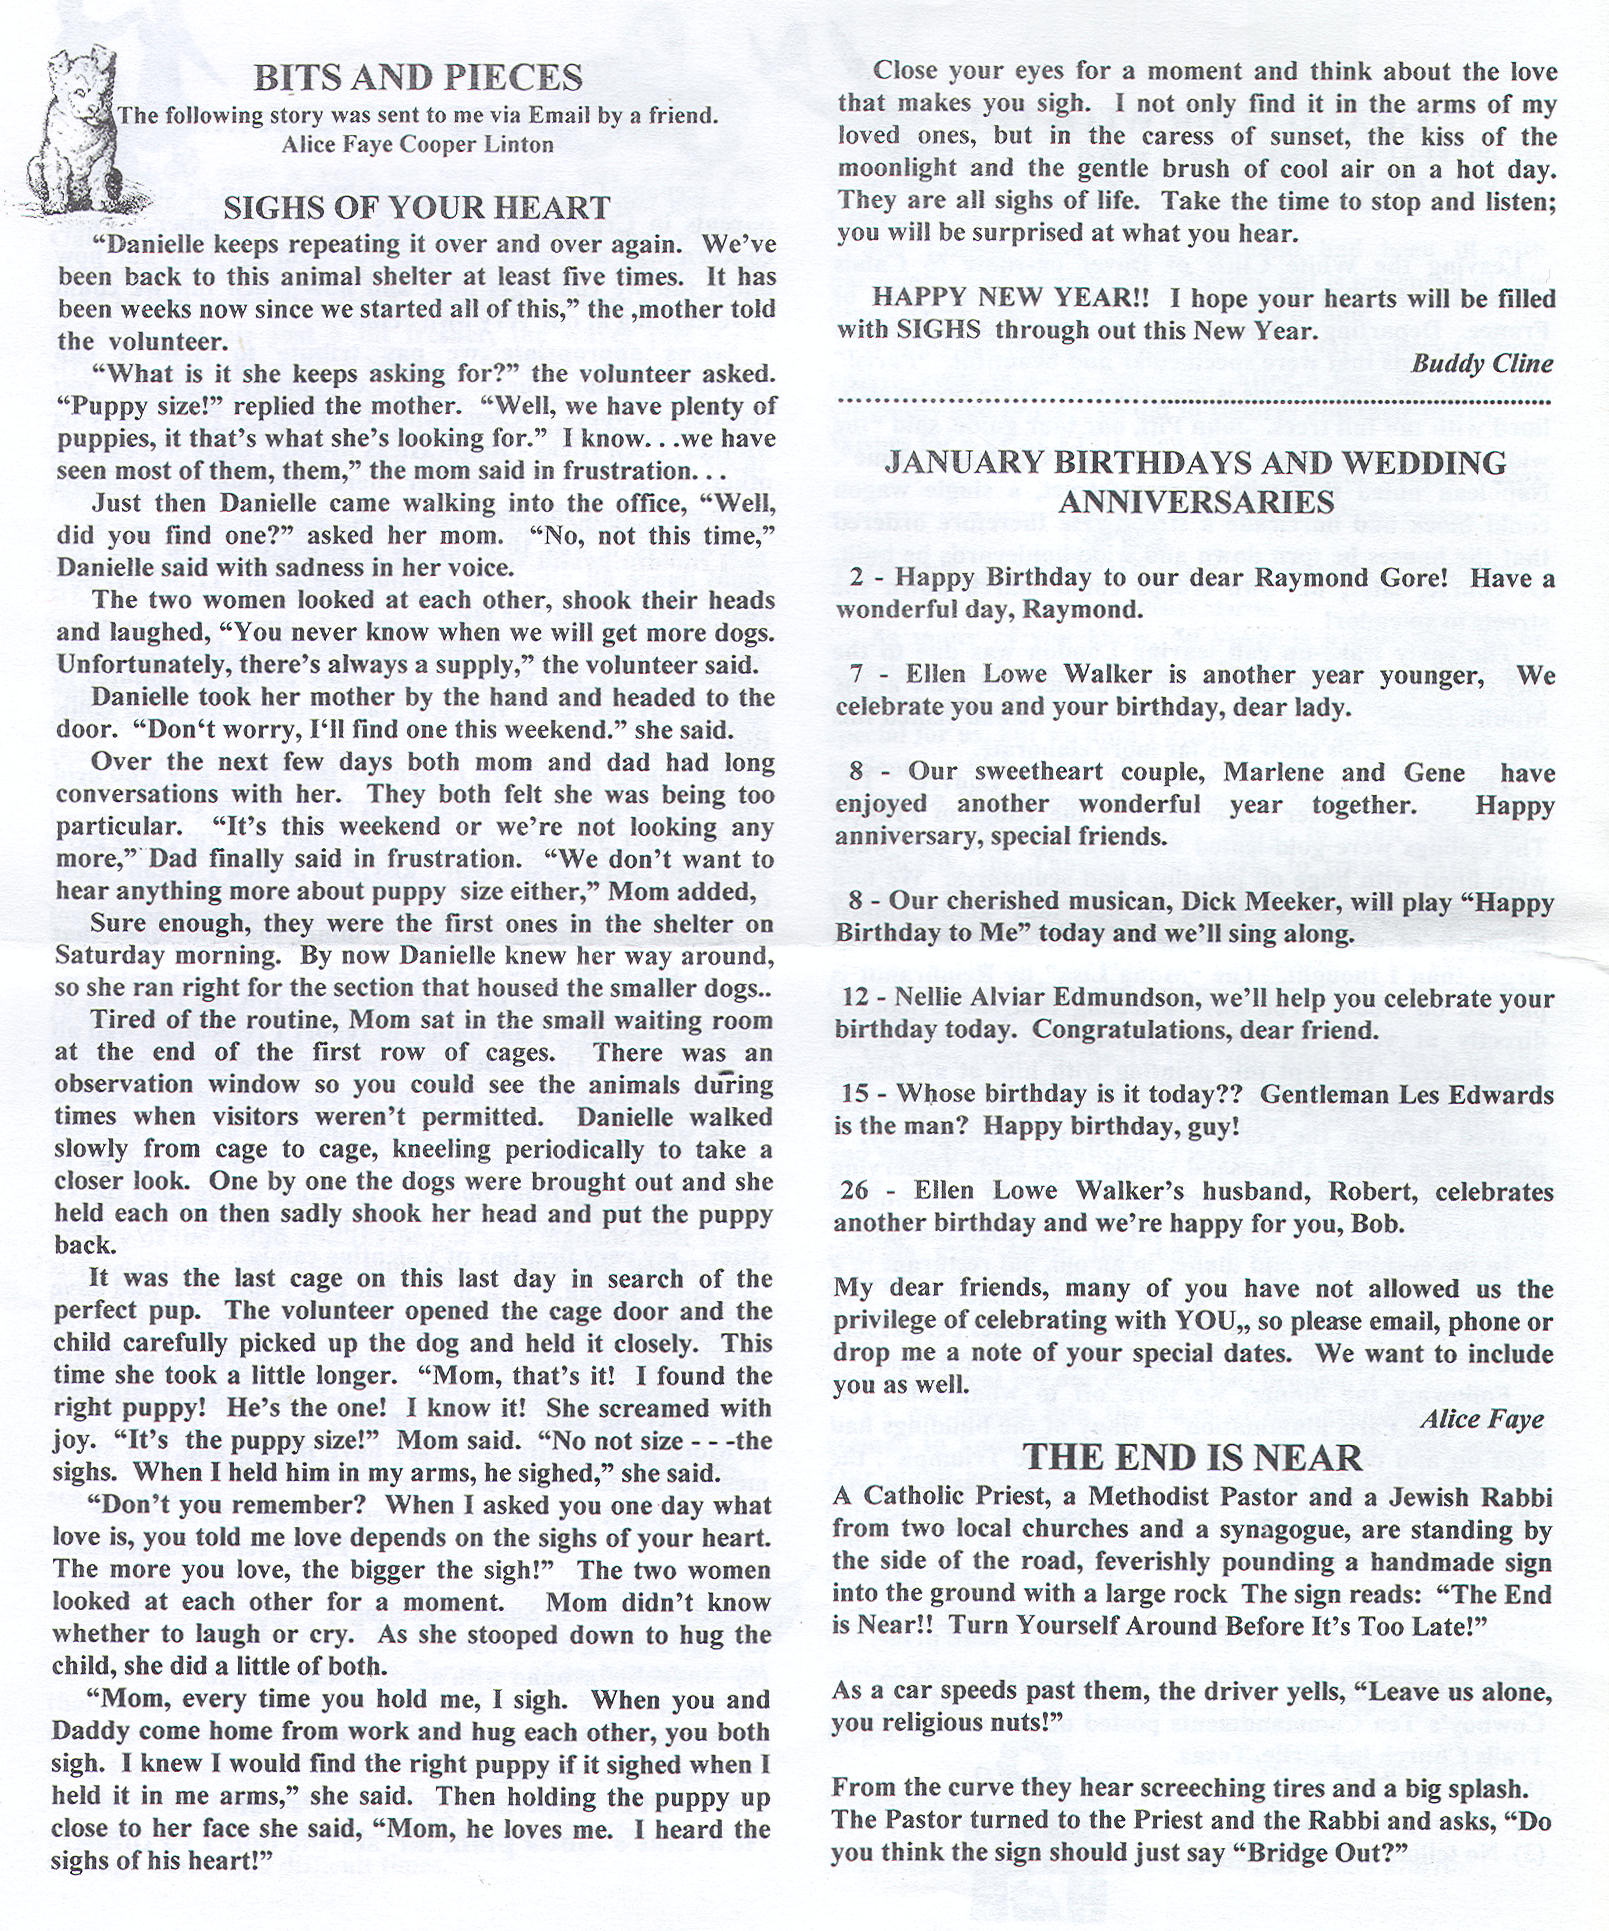 The Admiral - January 2007 - pg. 4